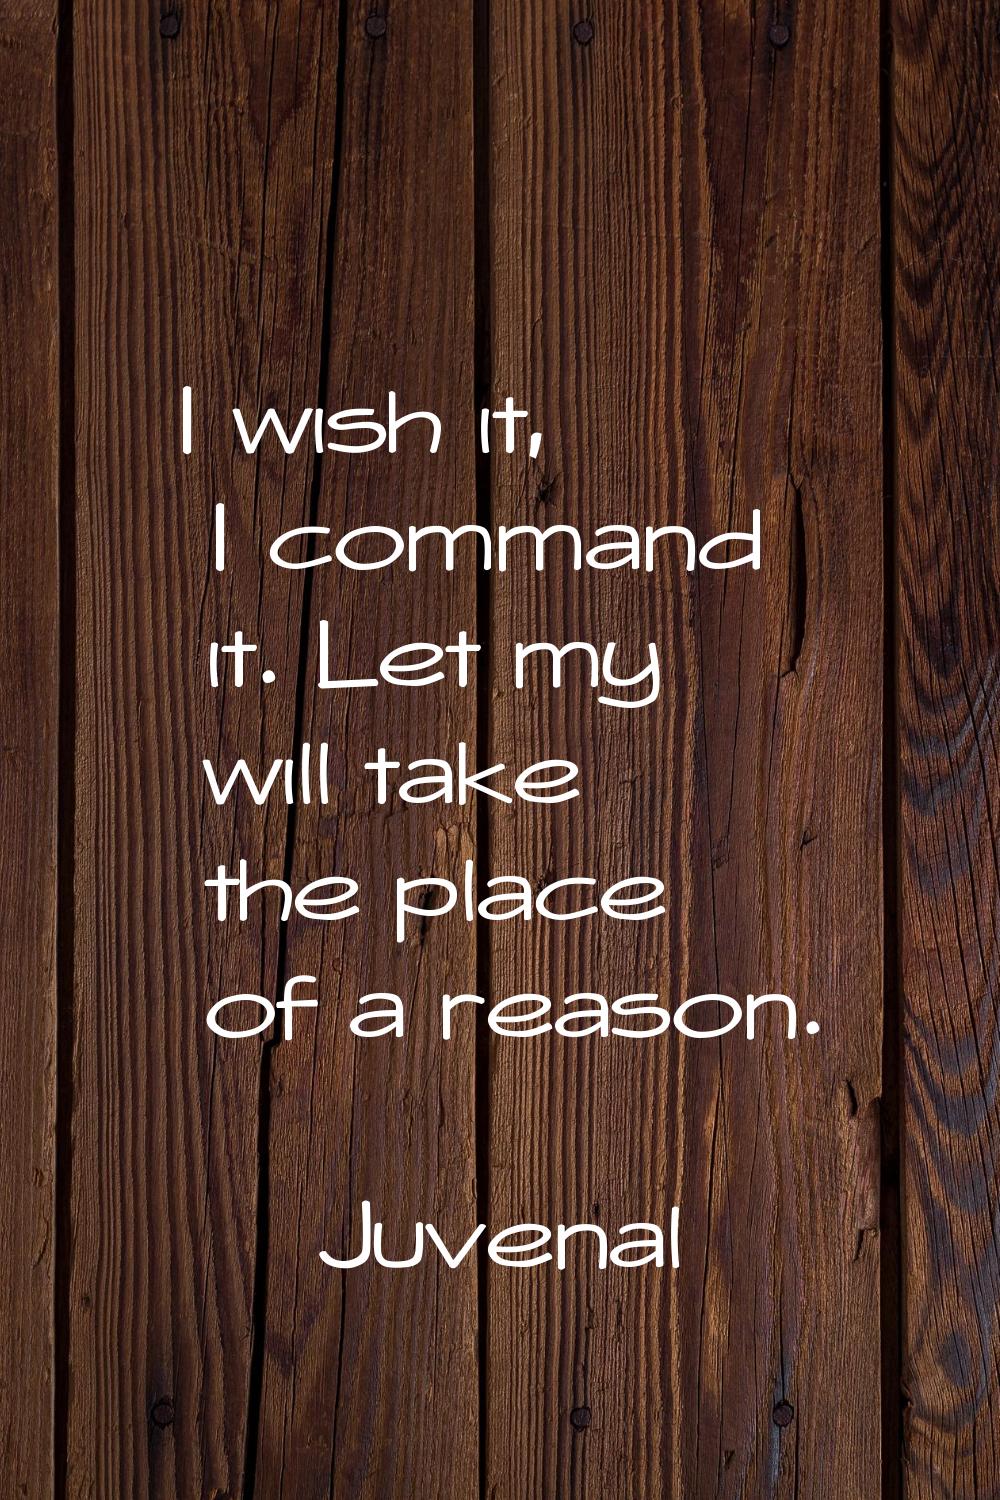 I wish it, I command it. Let my will take the place of a reason.